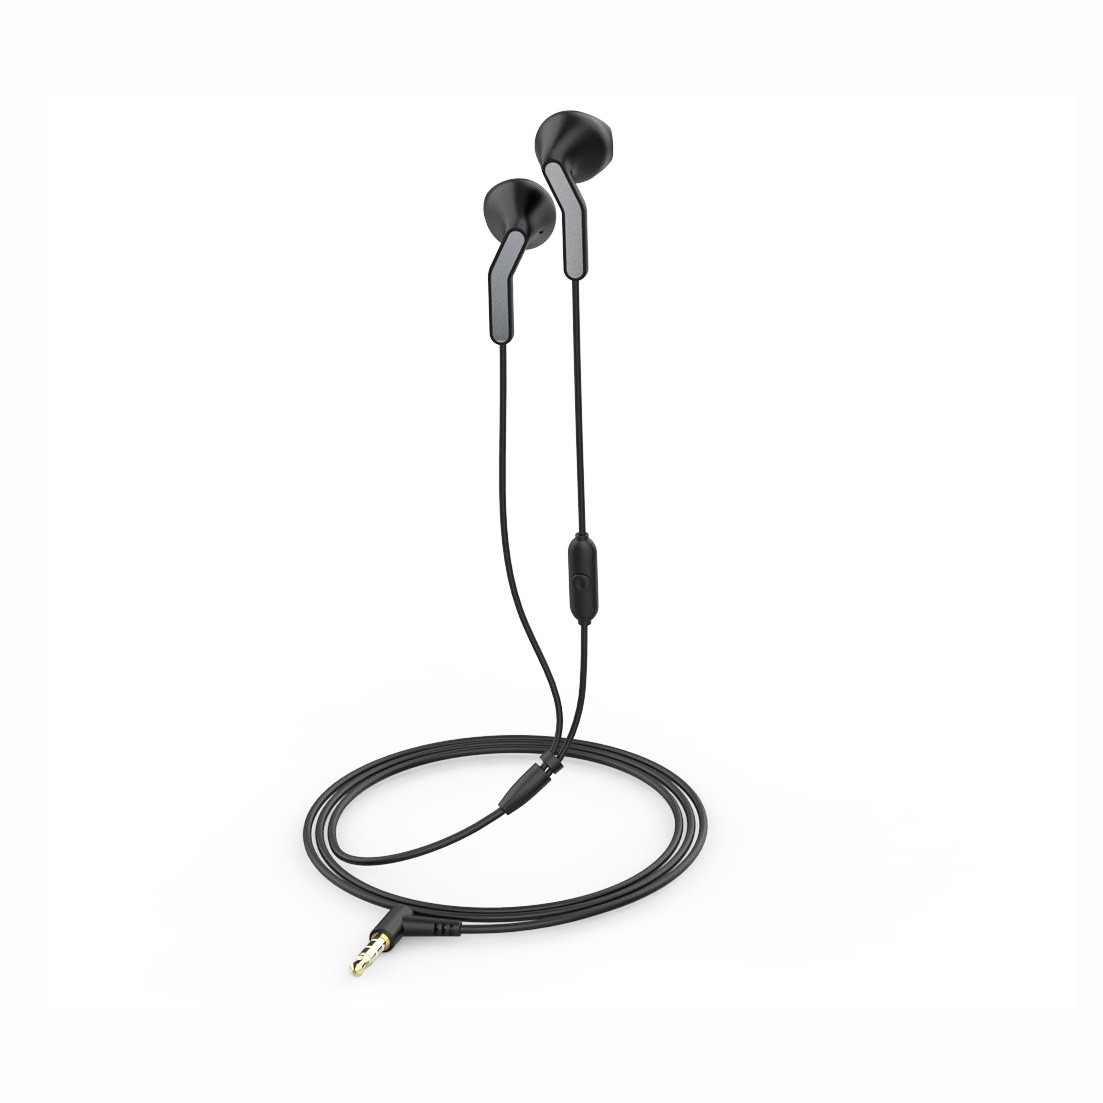 Auriculares Muvit For Change Estéreo E56 3.5mm - negro - 